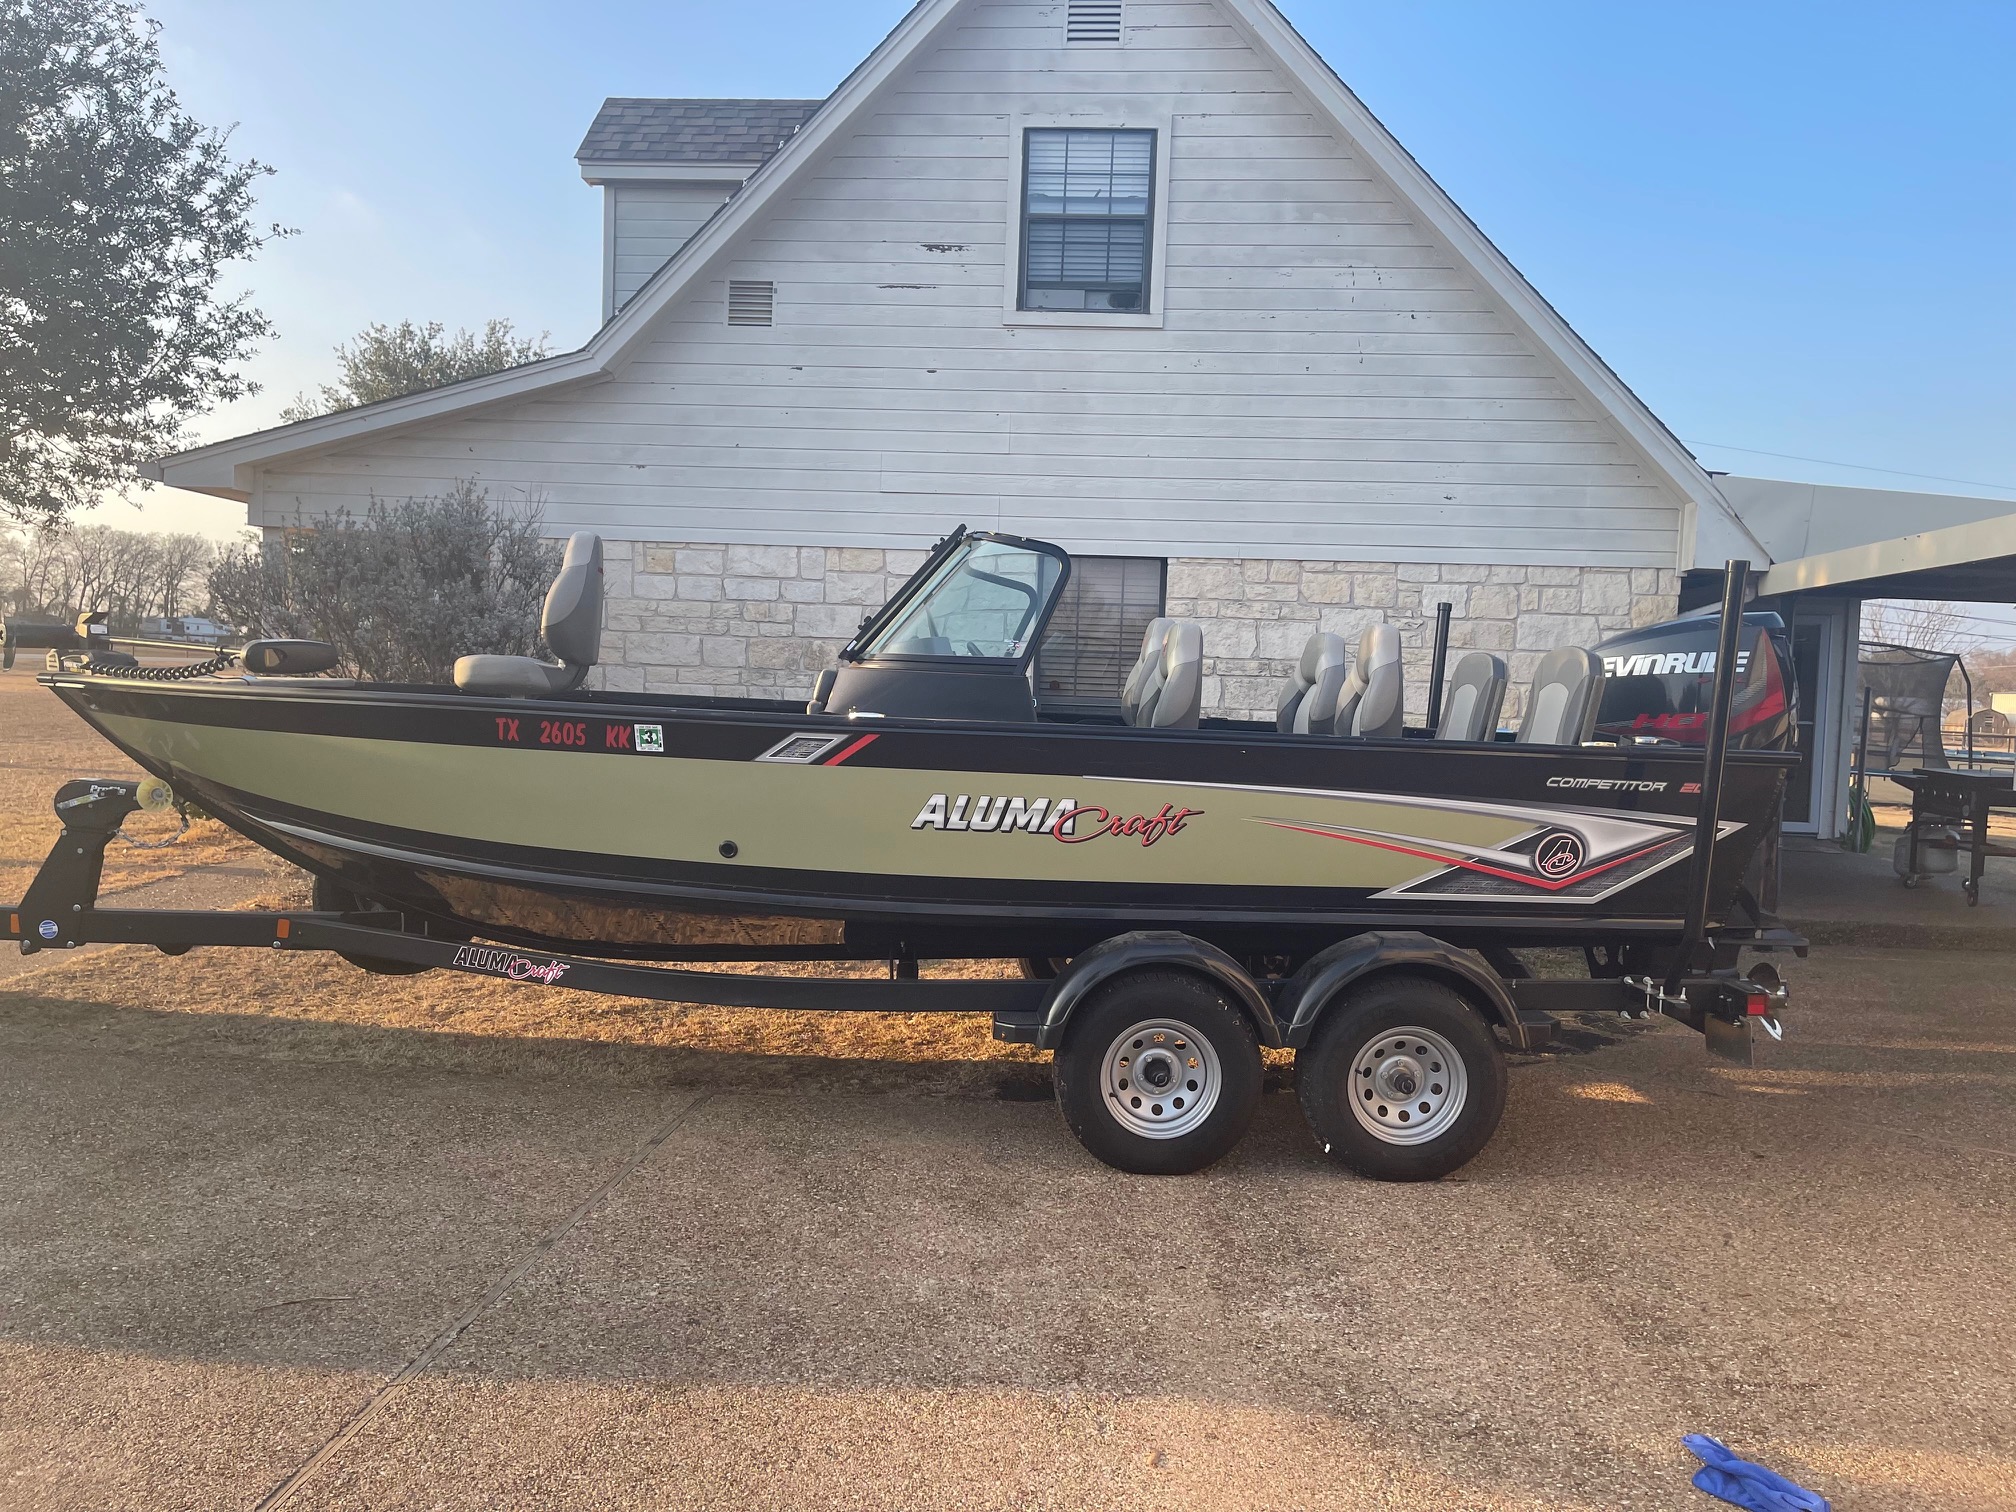 2020 Alumacraft 205 Competitor Power boat for sale in Waco, TX - image 1 